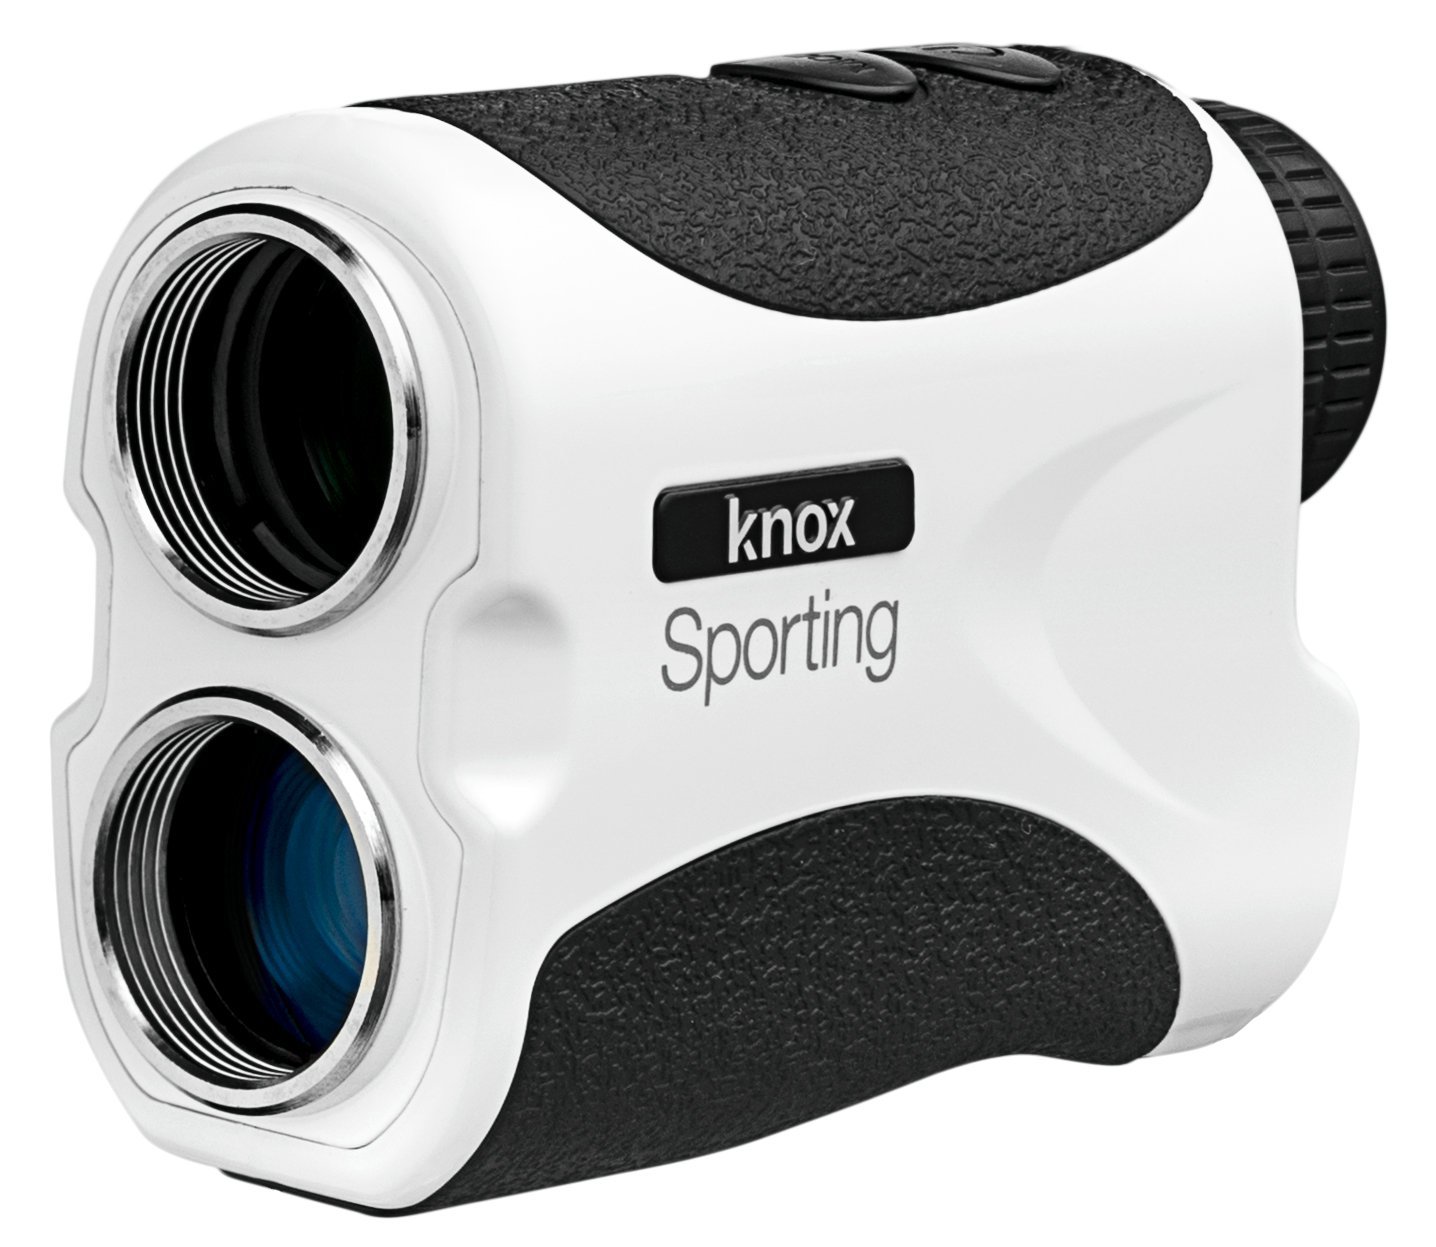 Knox Sporting Golf Laser Range Finders with Slope